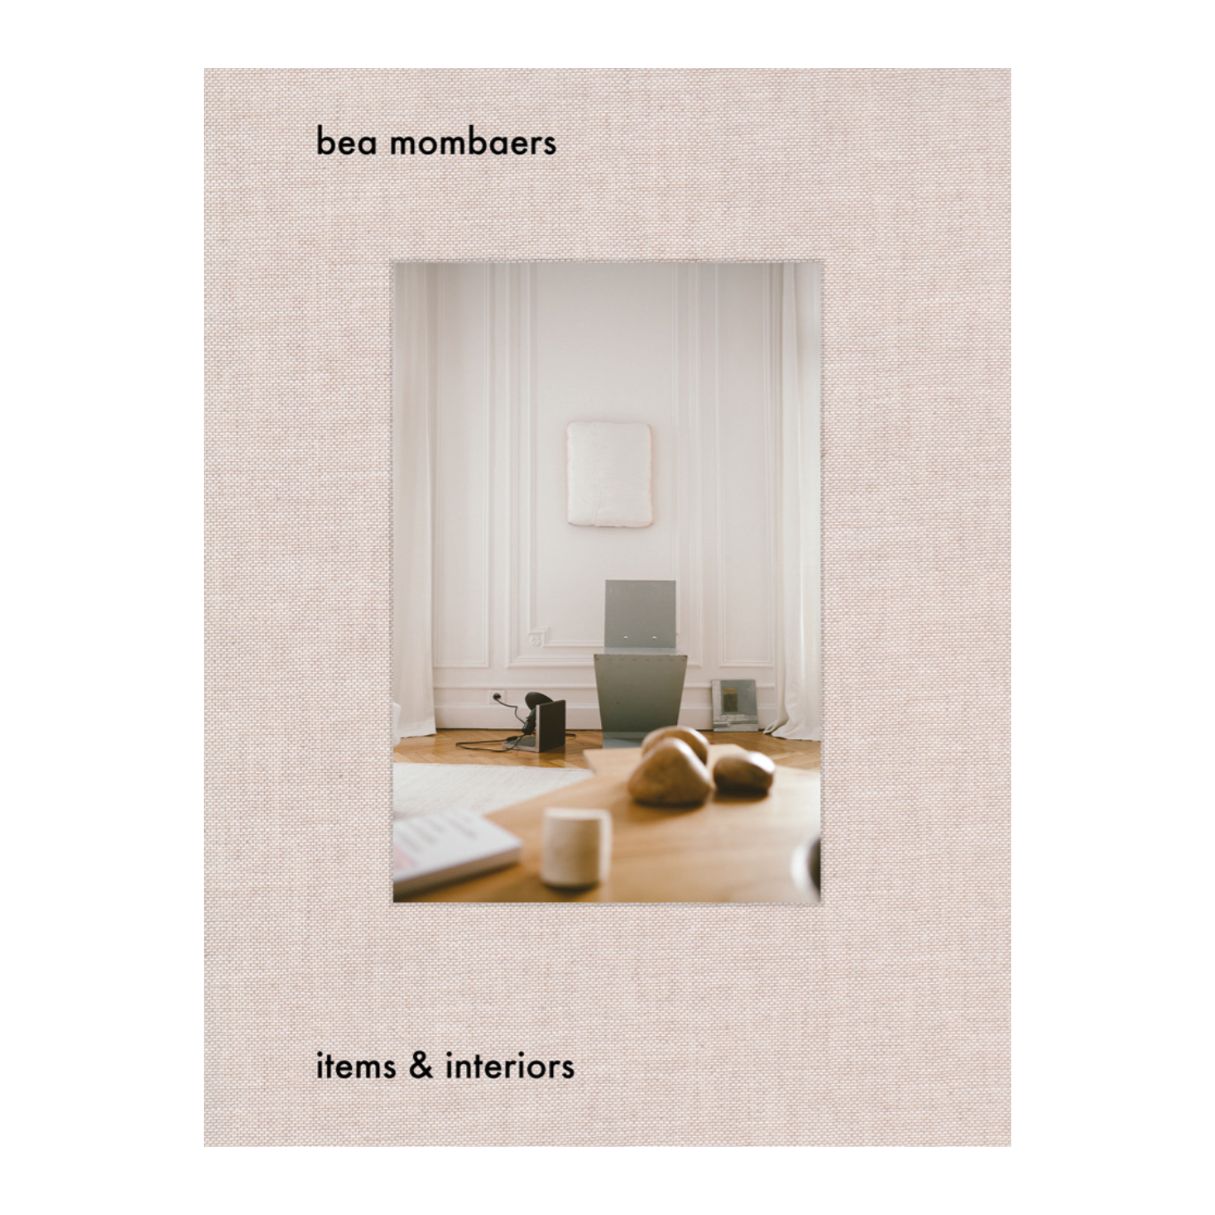 Bea Mombaers: Items and Interiors